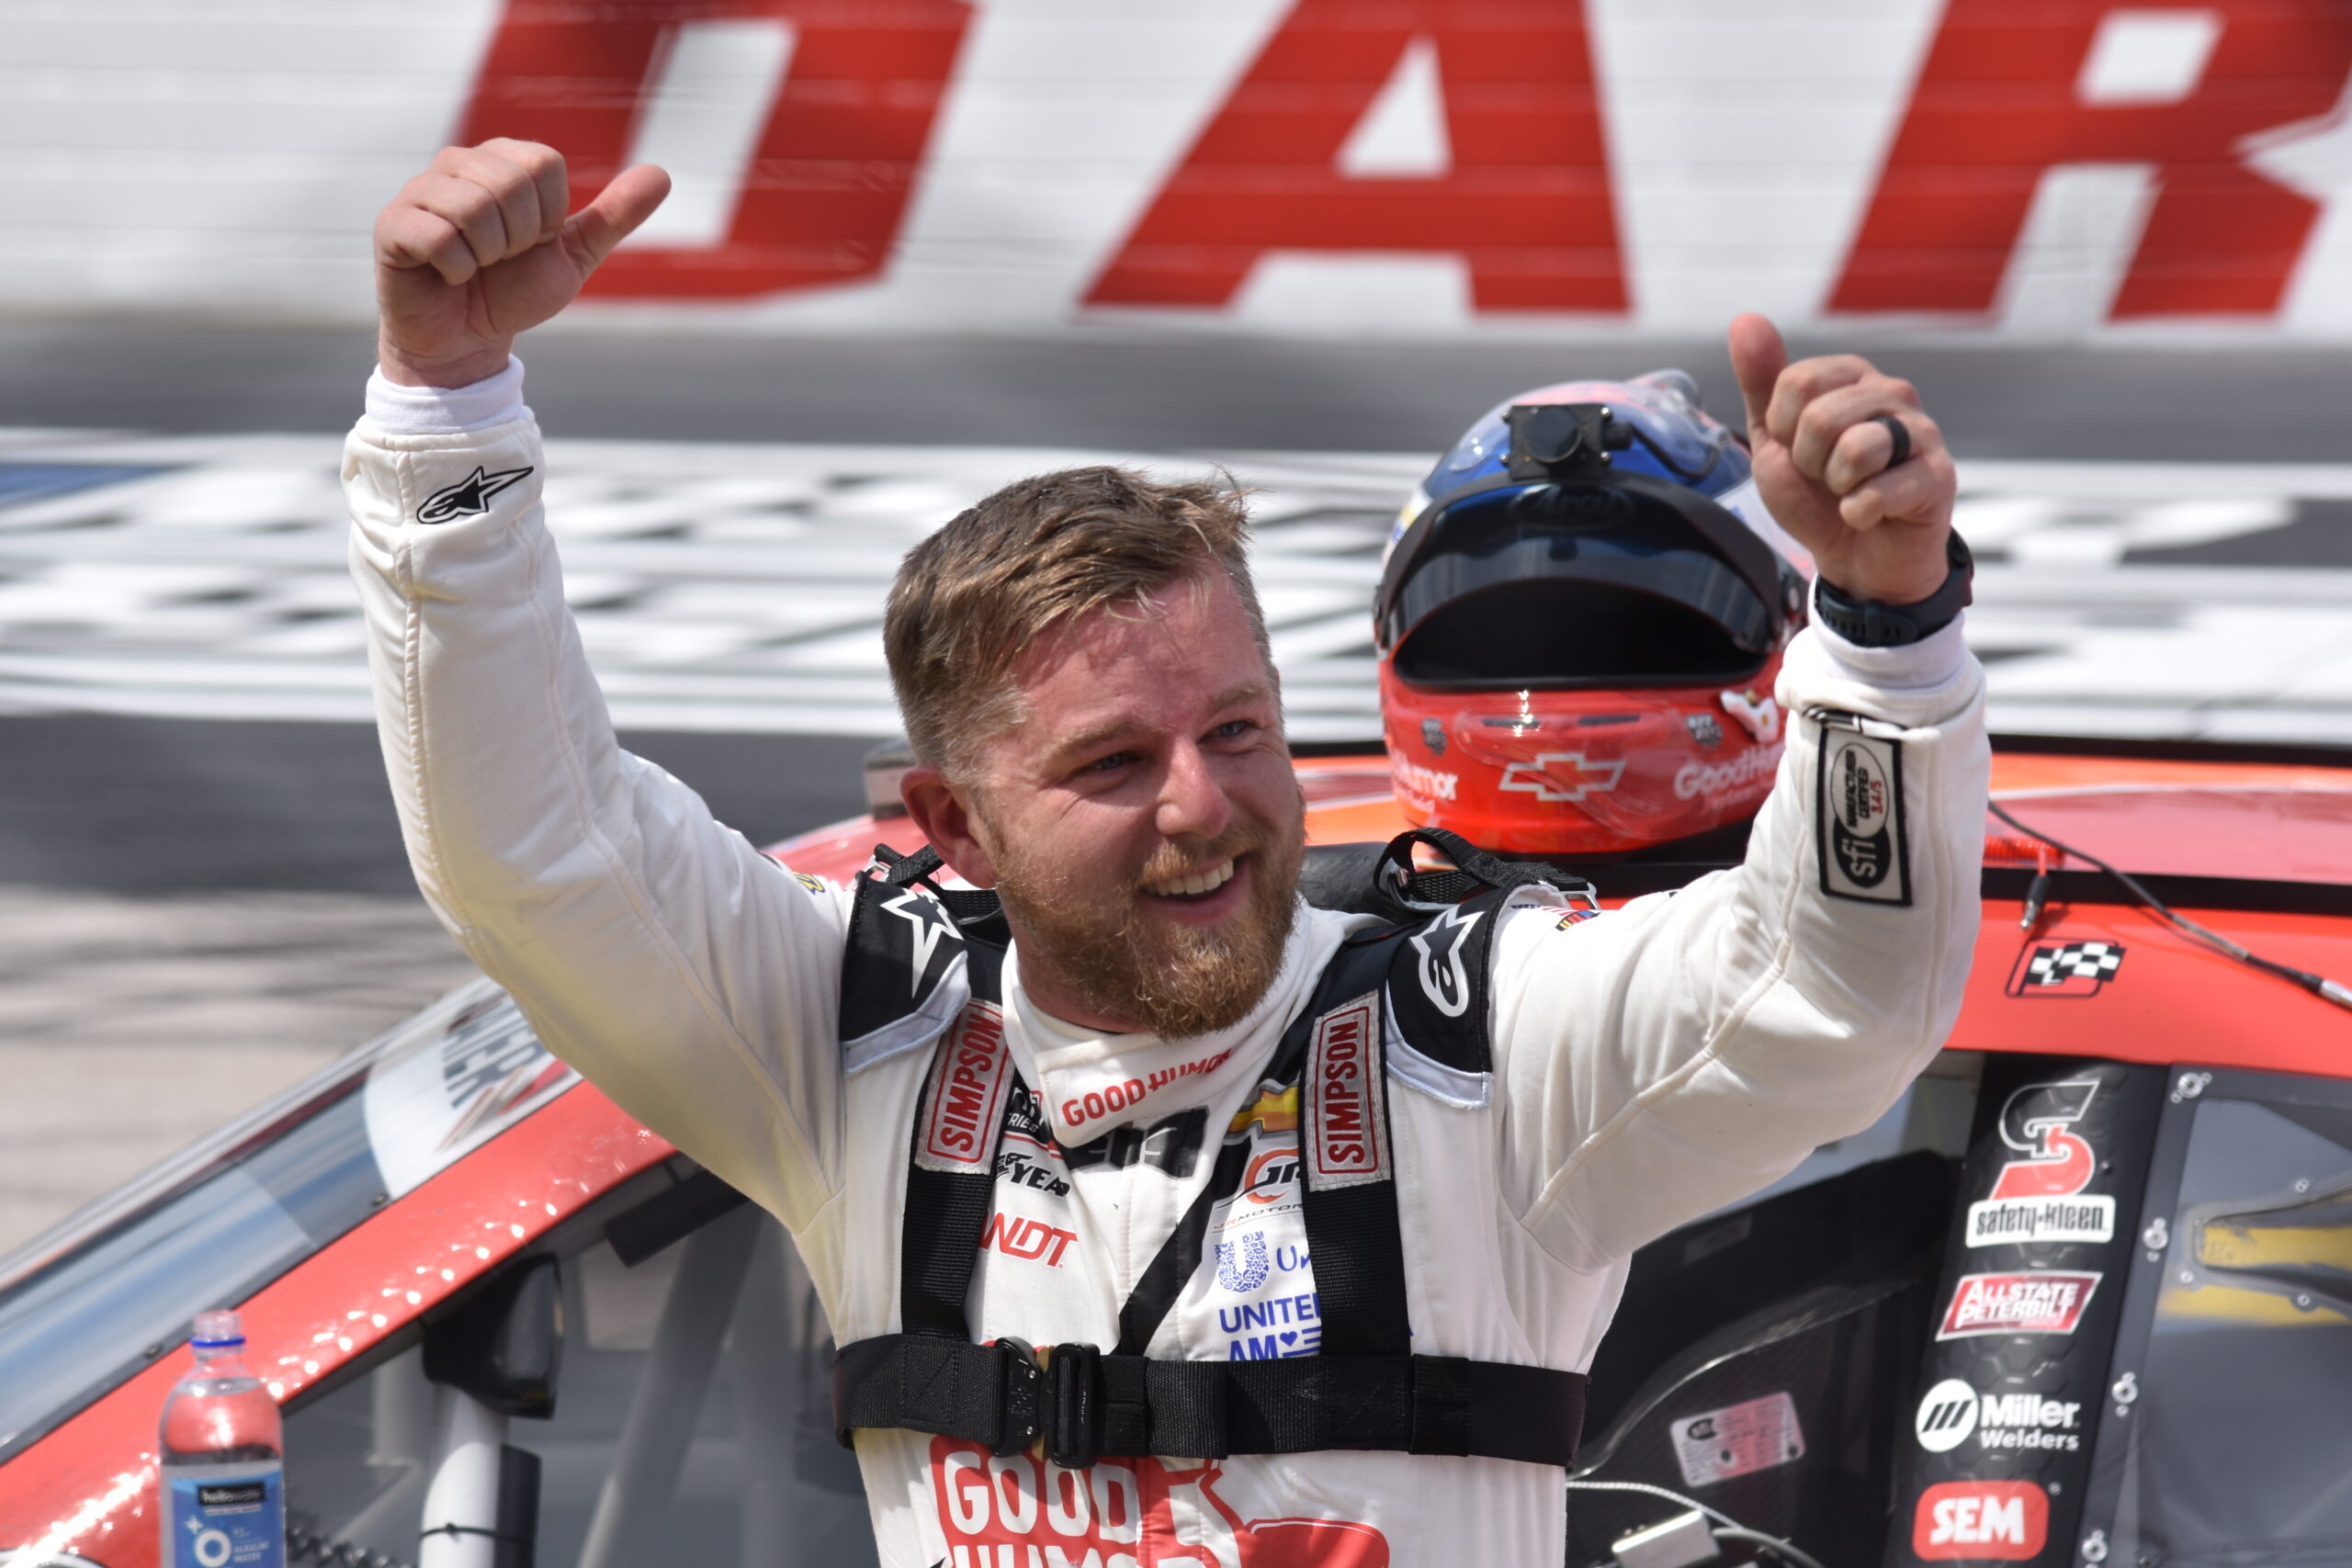 Truly, Justin Allgaier seems championship ready after his Darlington win. (Photo: Luis Torres/The Podium Finish)